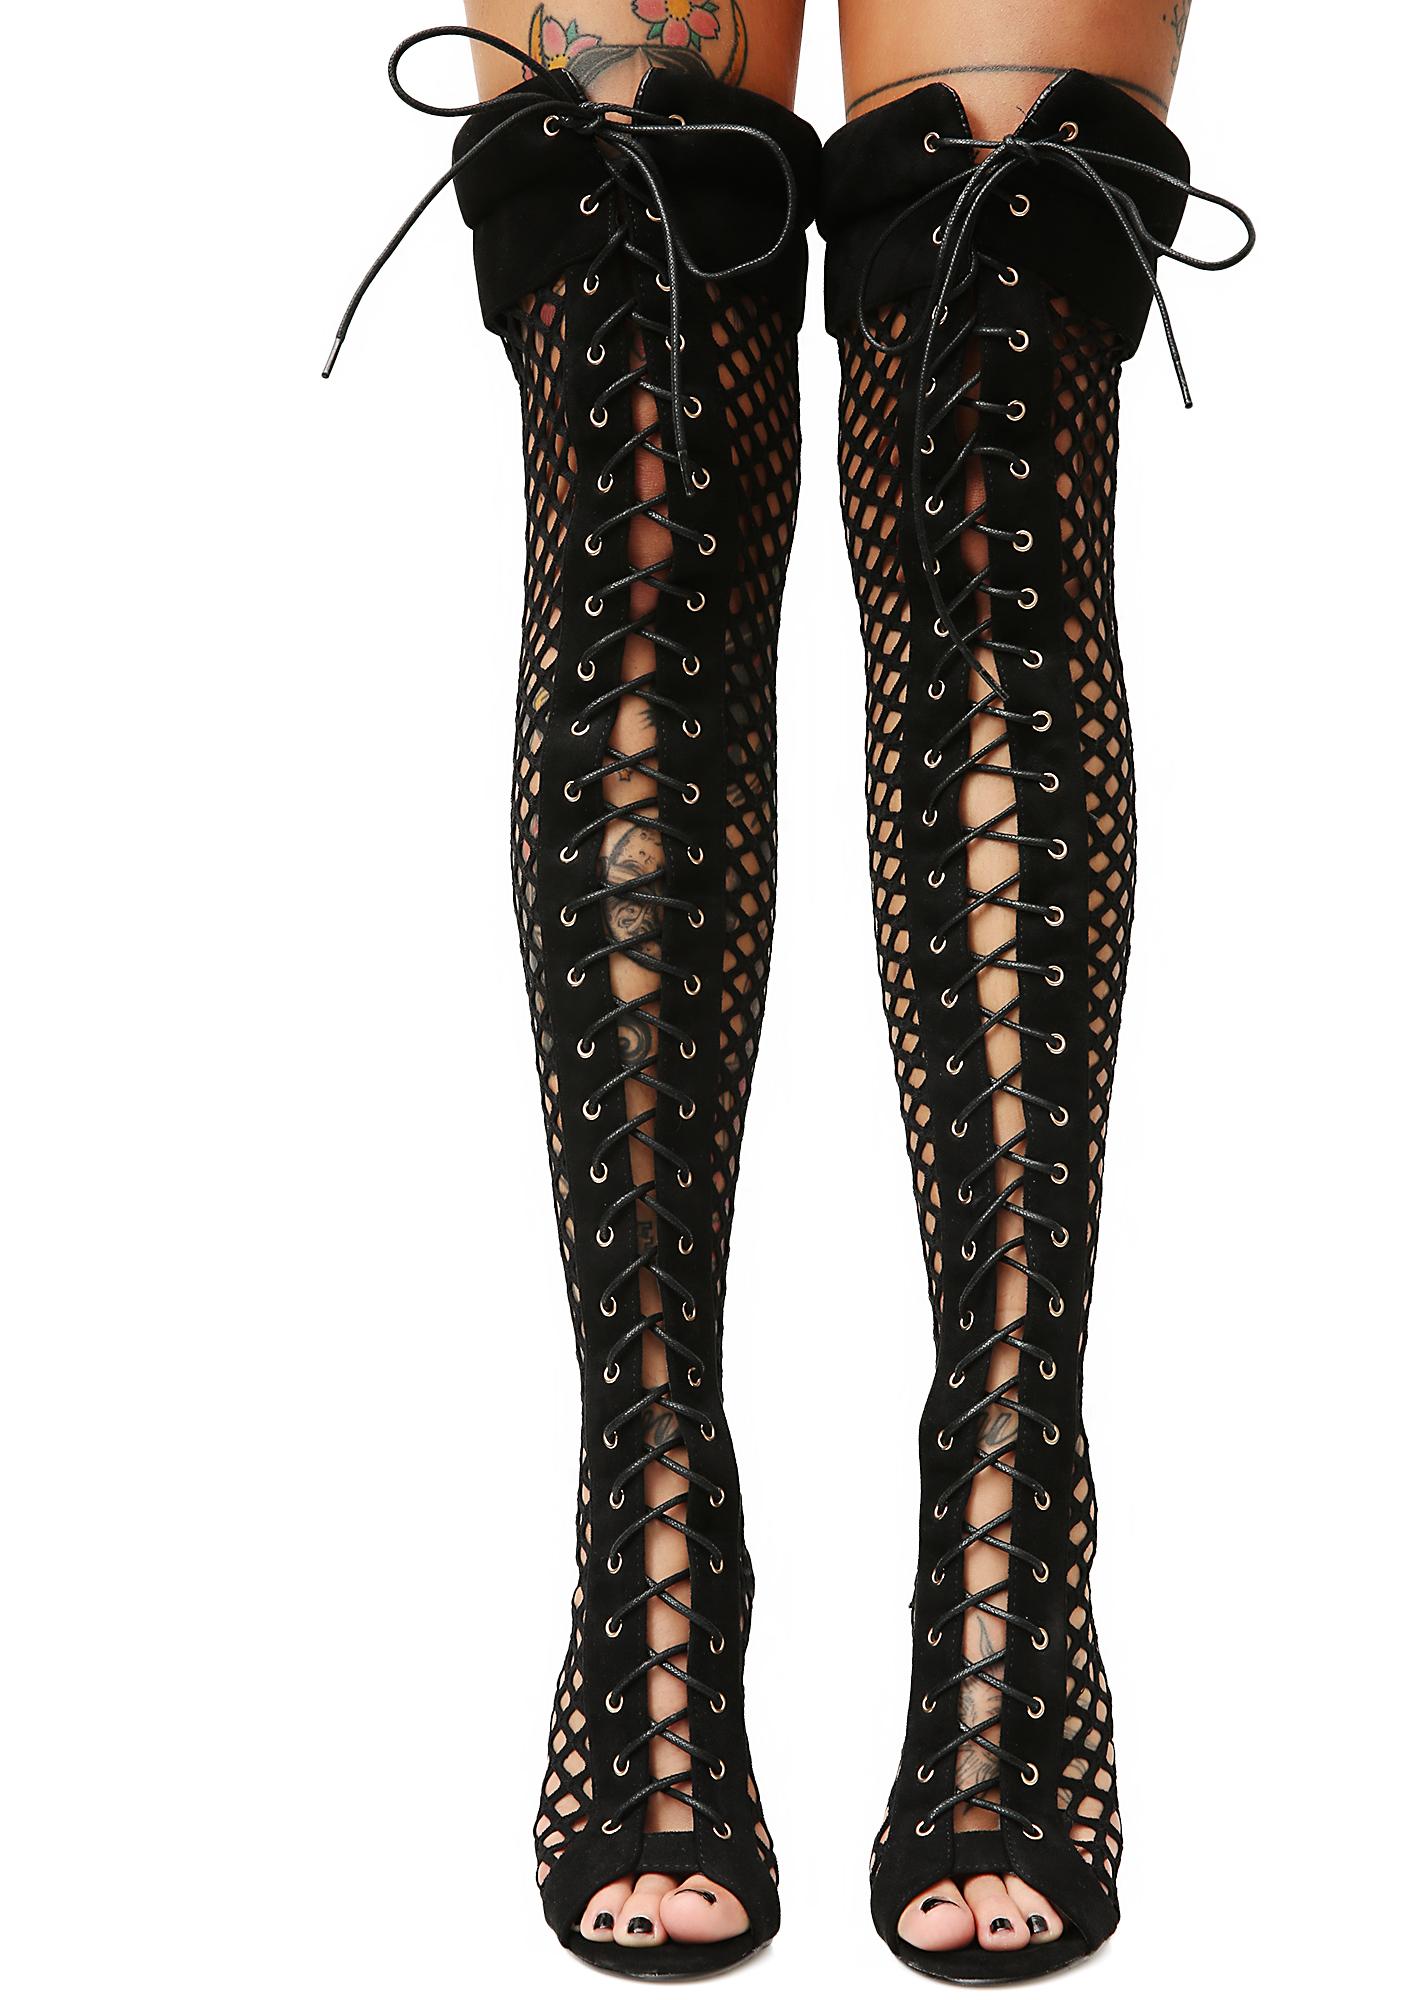 fishnets and thigh high boots